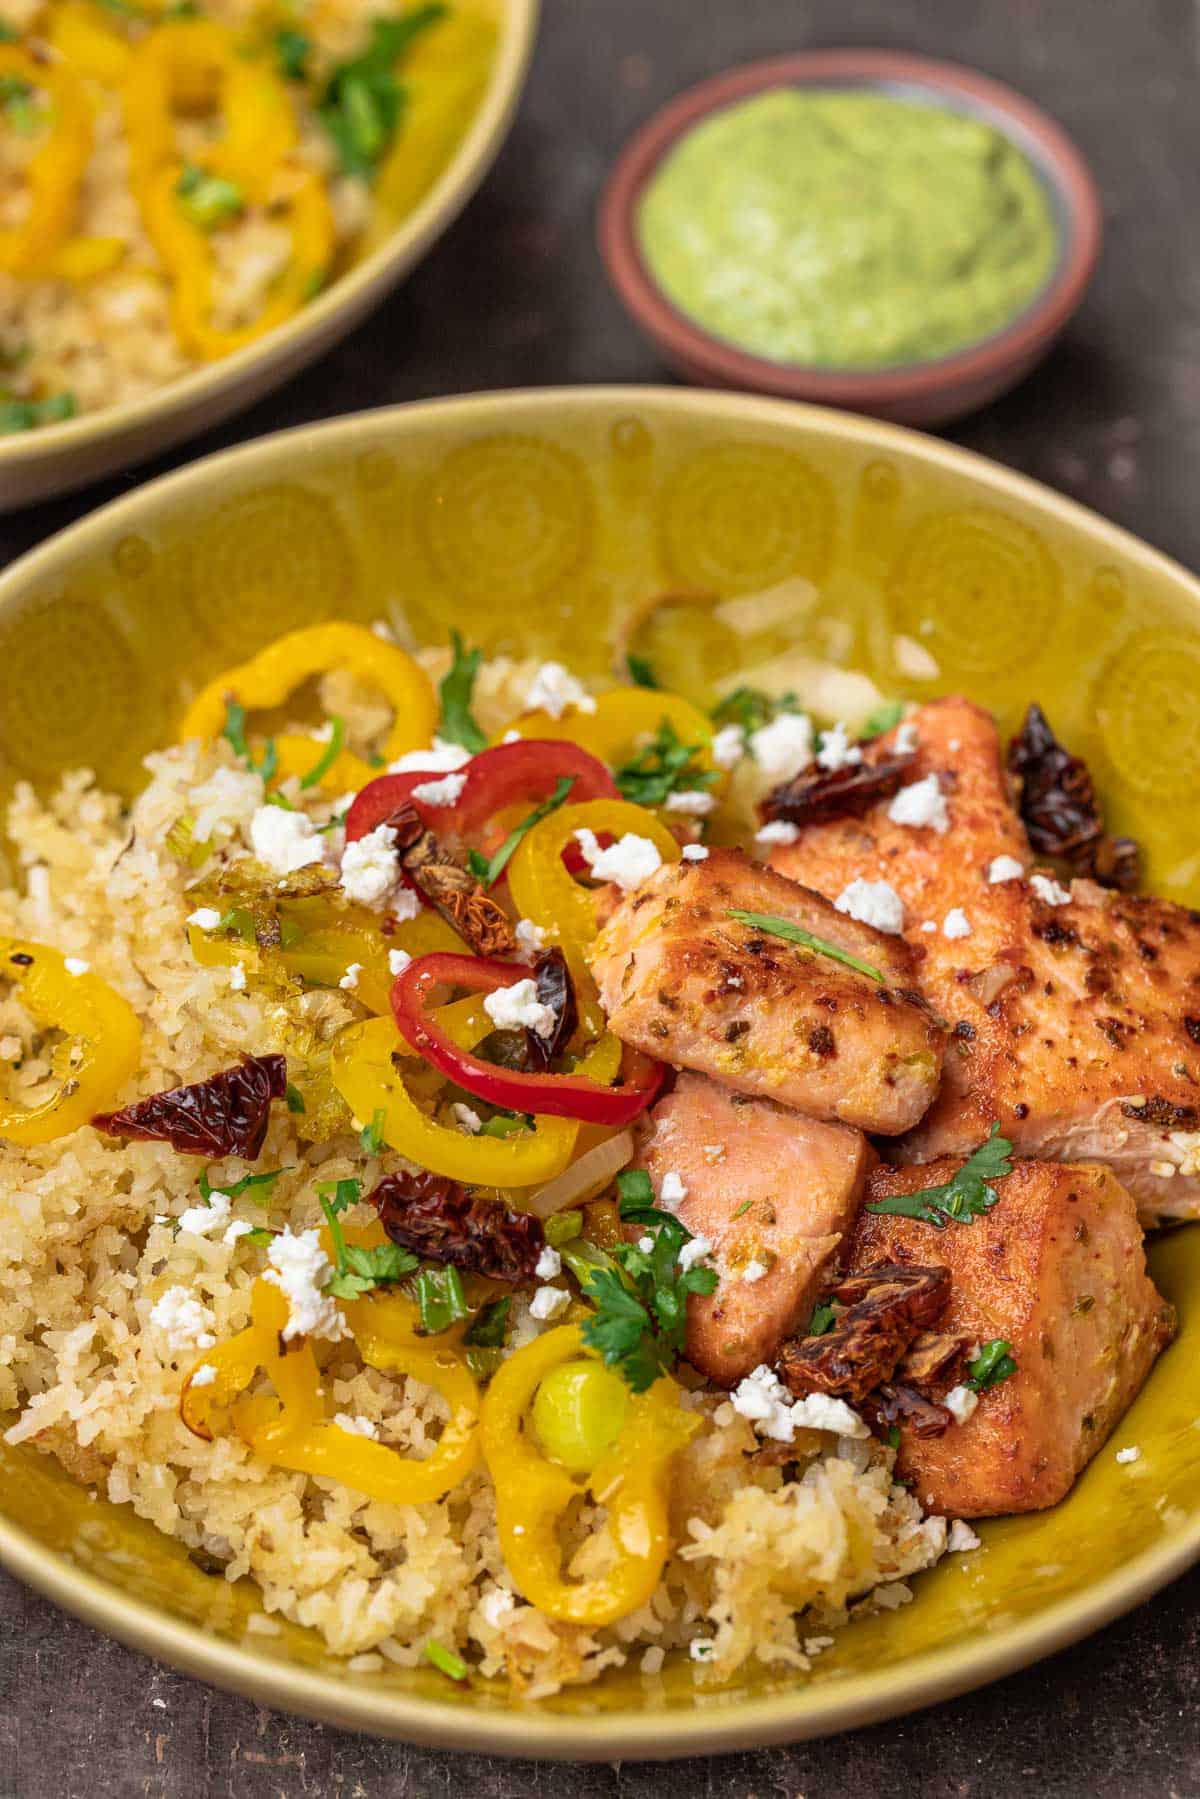 salmon rice bowls with colorful vegetables like bell peppers in a yellow bowl